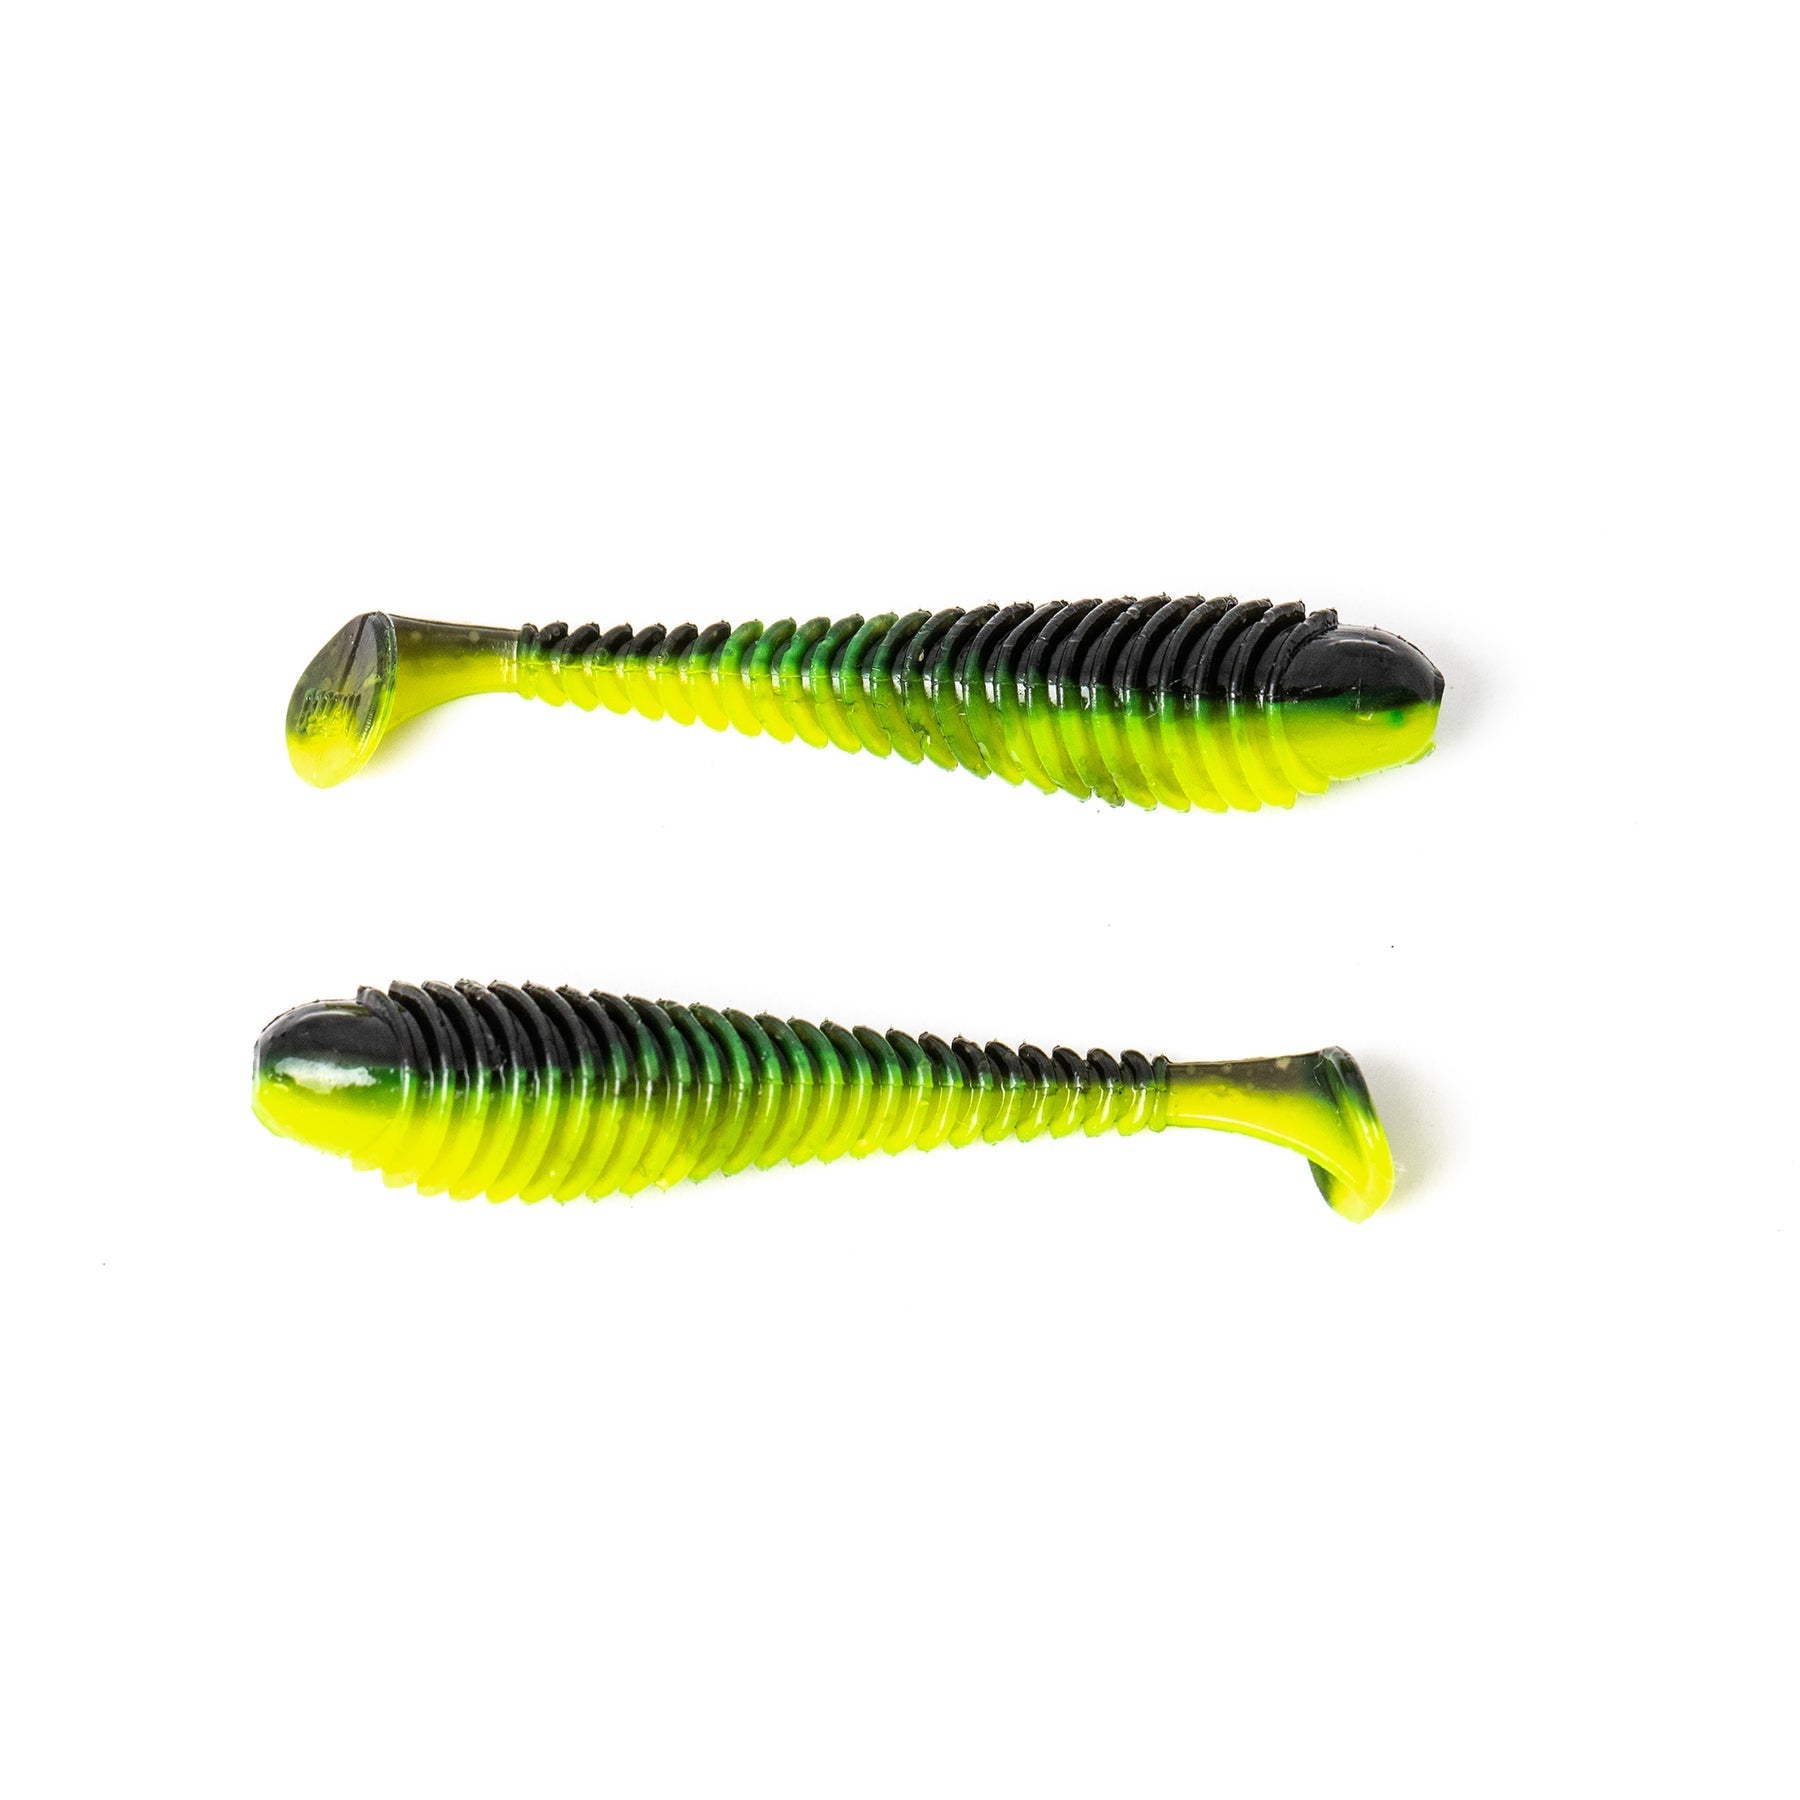 Googan Squad Snacky Swimmer - Hamilton Bait and Tackle